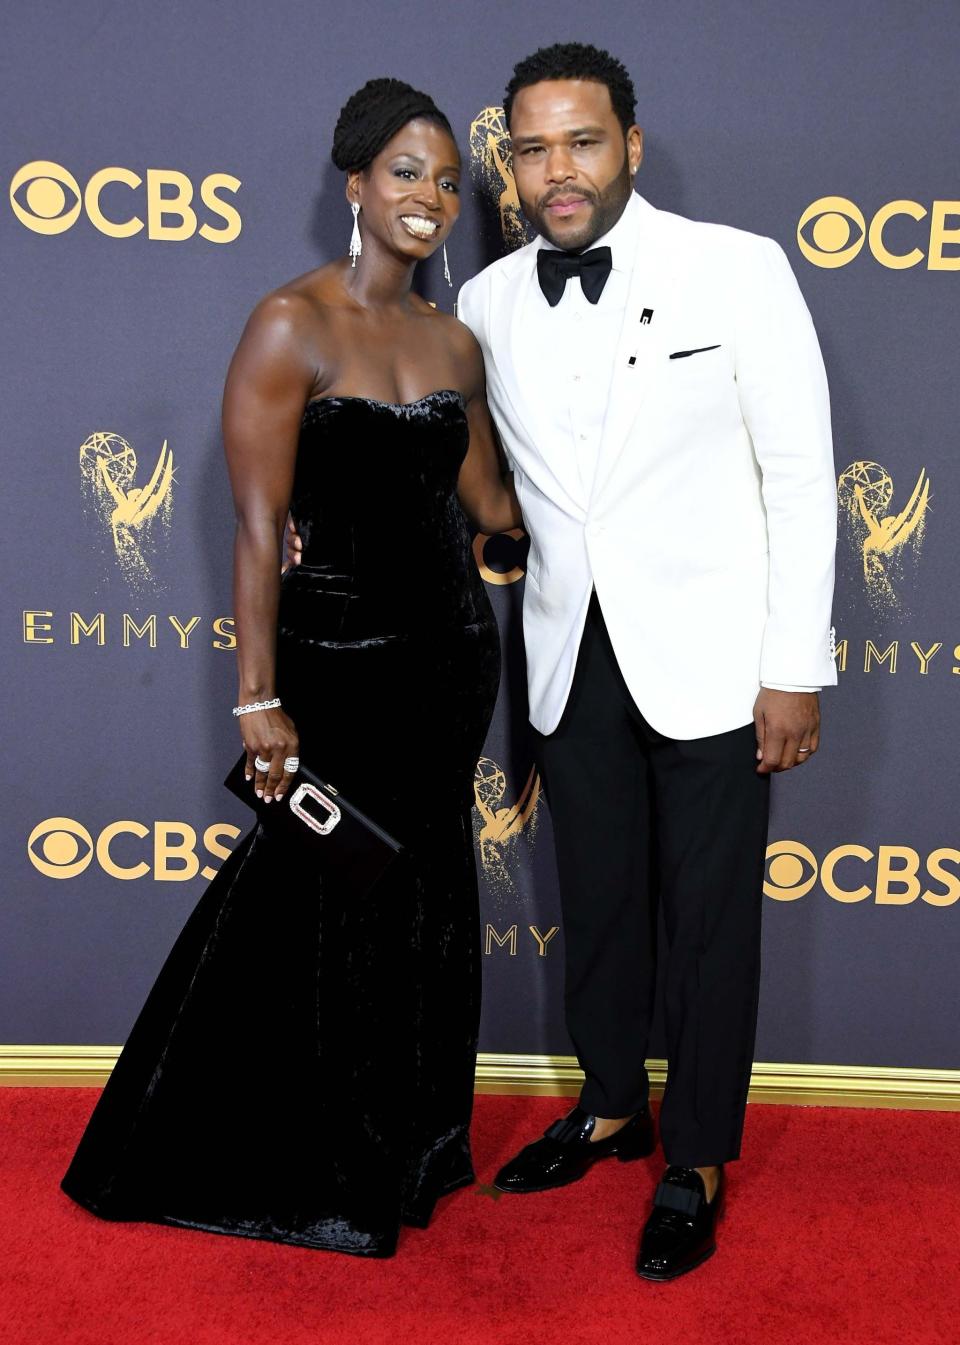 Anthony Anderson and Alvina Renee Stewart